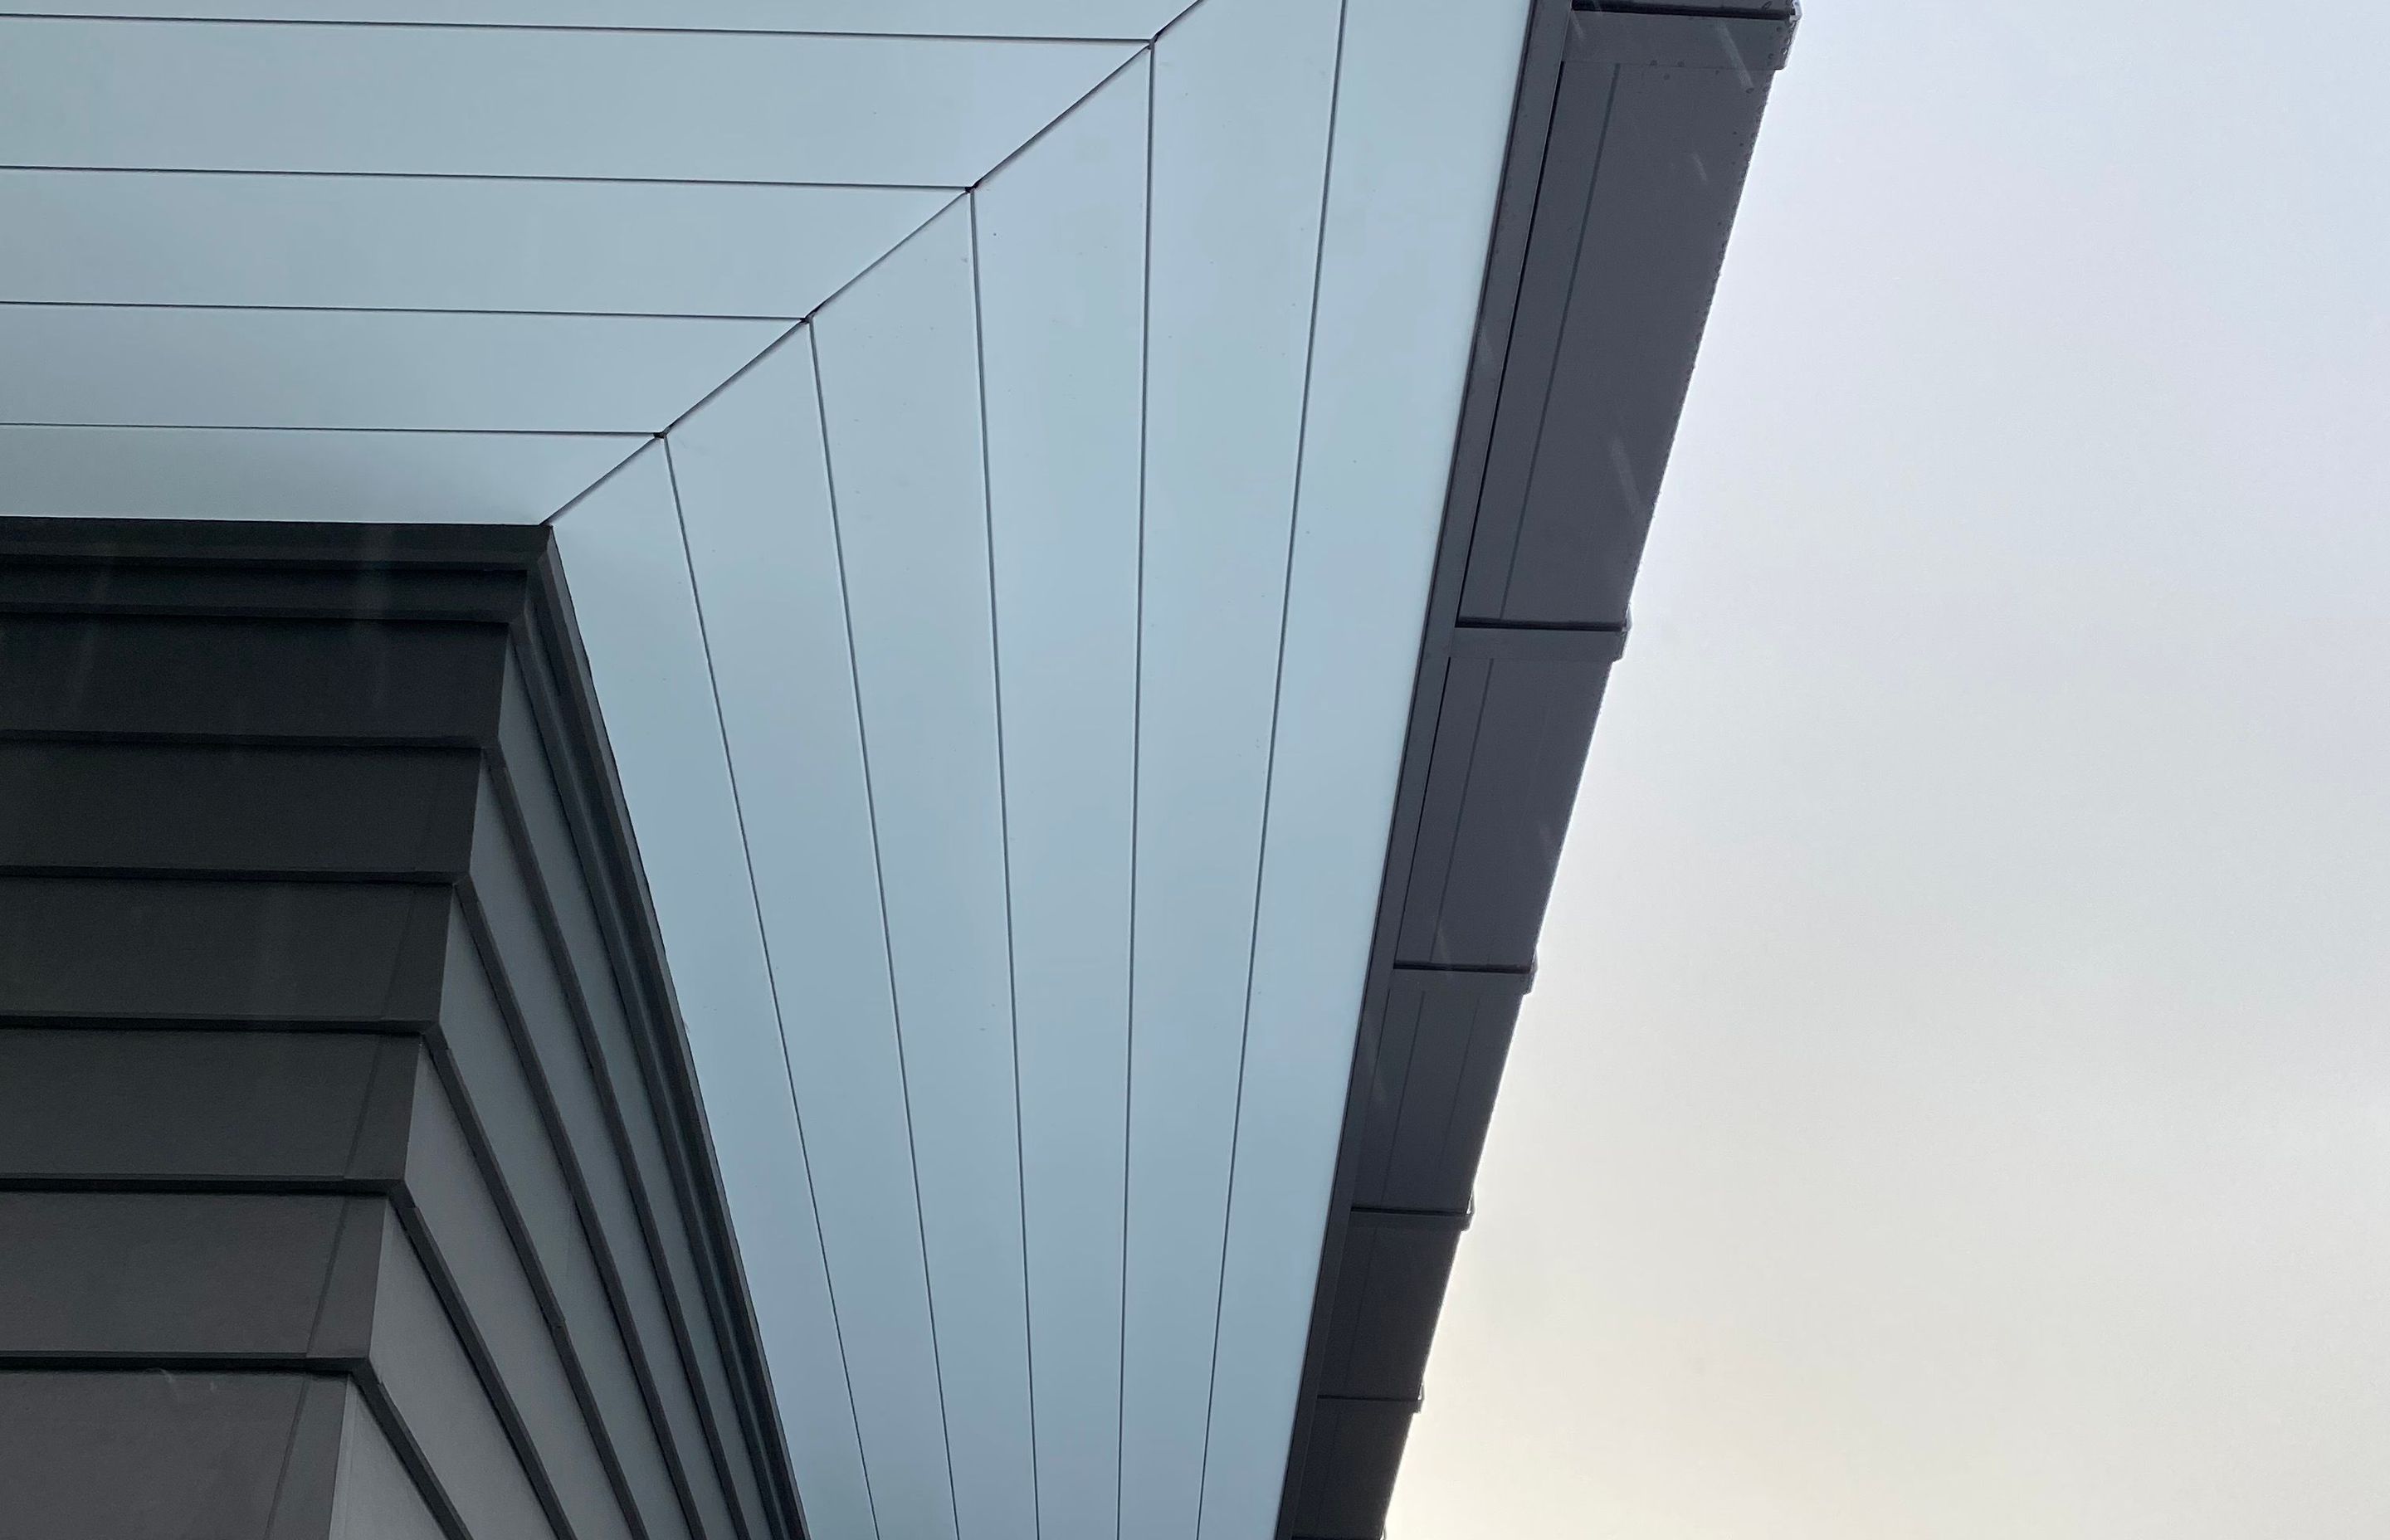 The Ribon Continuous Interlocking Soffit System integrates fascia, soffit, spouting and downpipes into a system of the same materials, all under one warranty.